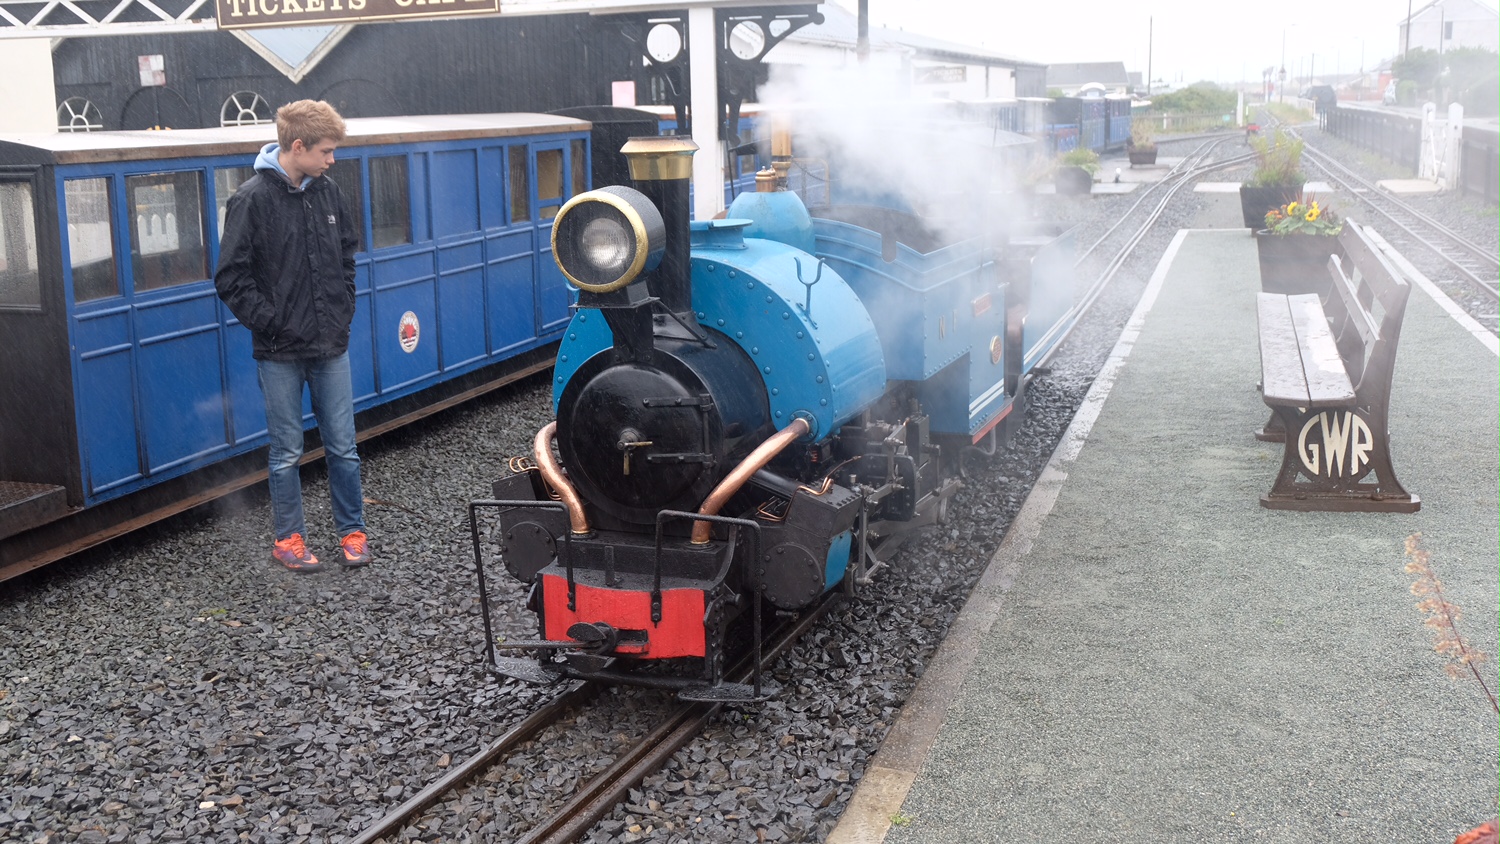 Great Little Trains of Wales: Nice little engine. One third scale, Darjeeling Himalayan Mountain Railway.